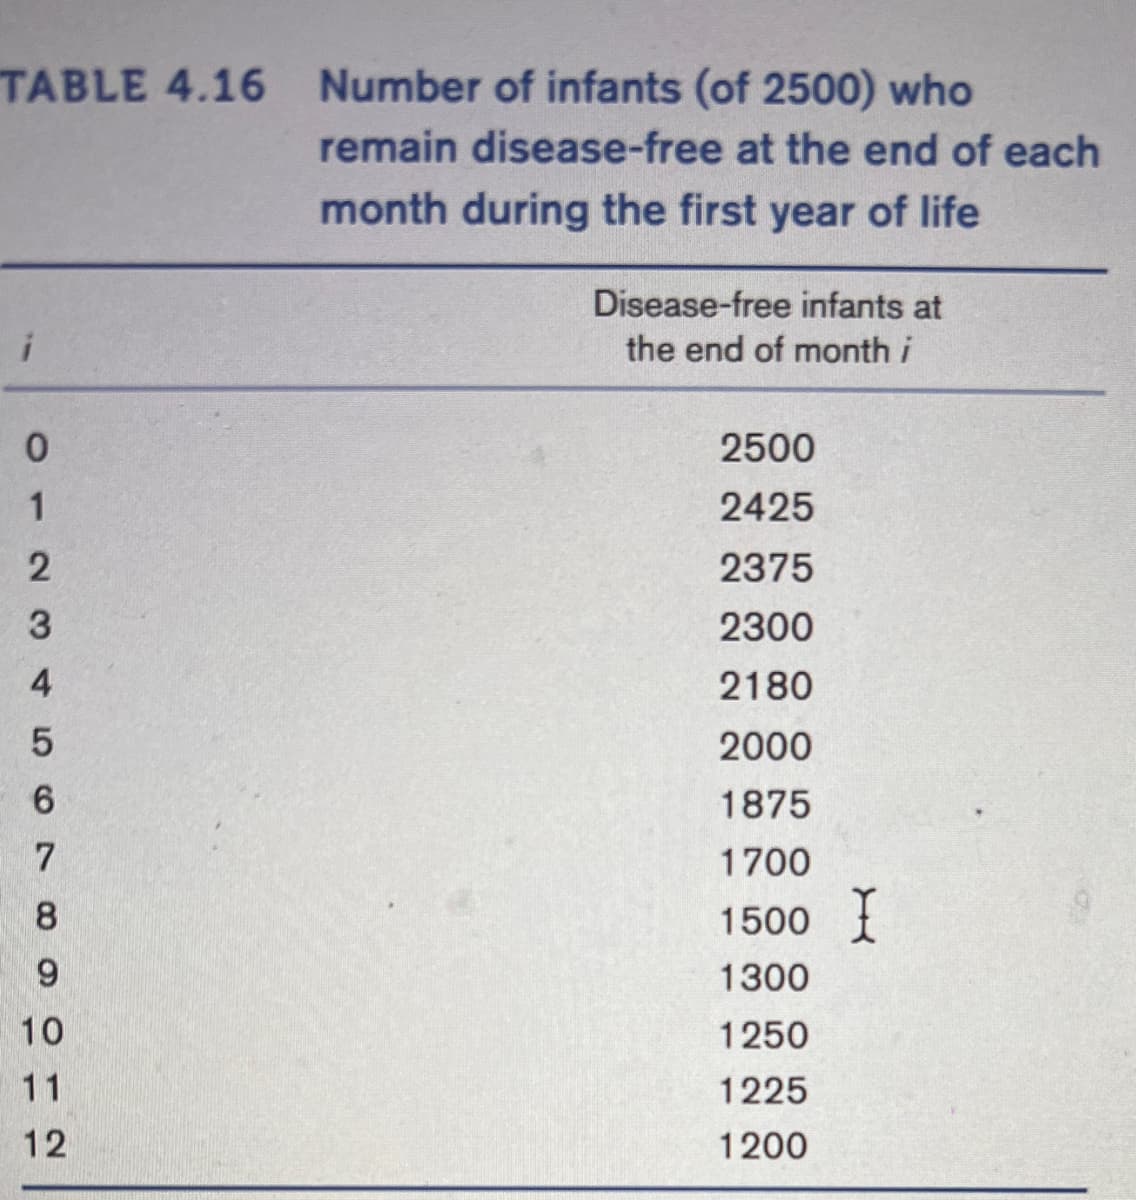 TABLE 4.16 Number of infants (of 2500) who
i
0
1
2
3
4
5
6
7
8
9
10
11
12
remain disease-free at the end of each
month during the first year of life
Disease-free infants at
the end of month i
2500
2425
2375
2300
2180
2000
1875
1700
1500 I
1300
1250
1225
1200